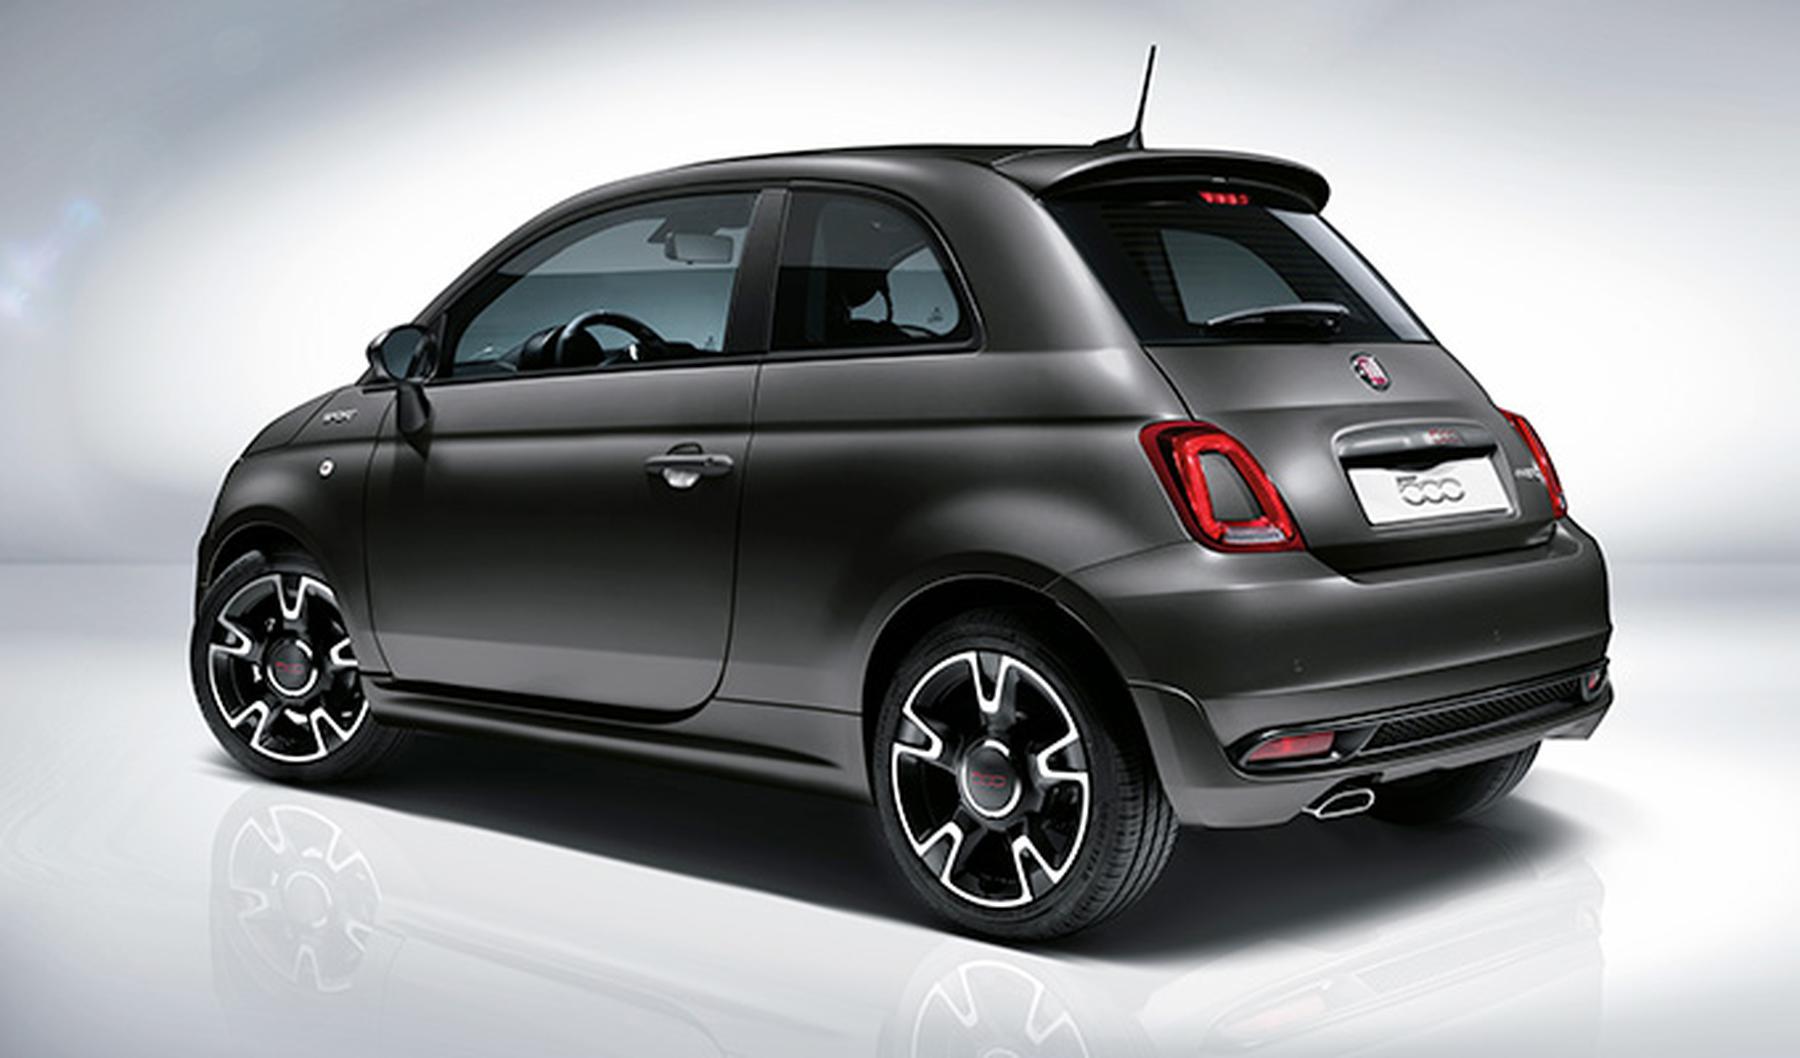 The refreshed Fiat 500 Sport